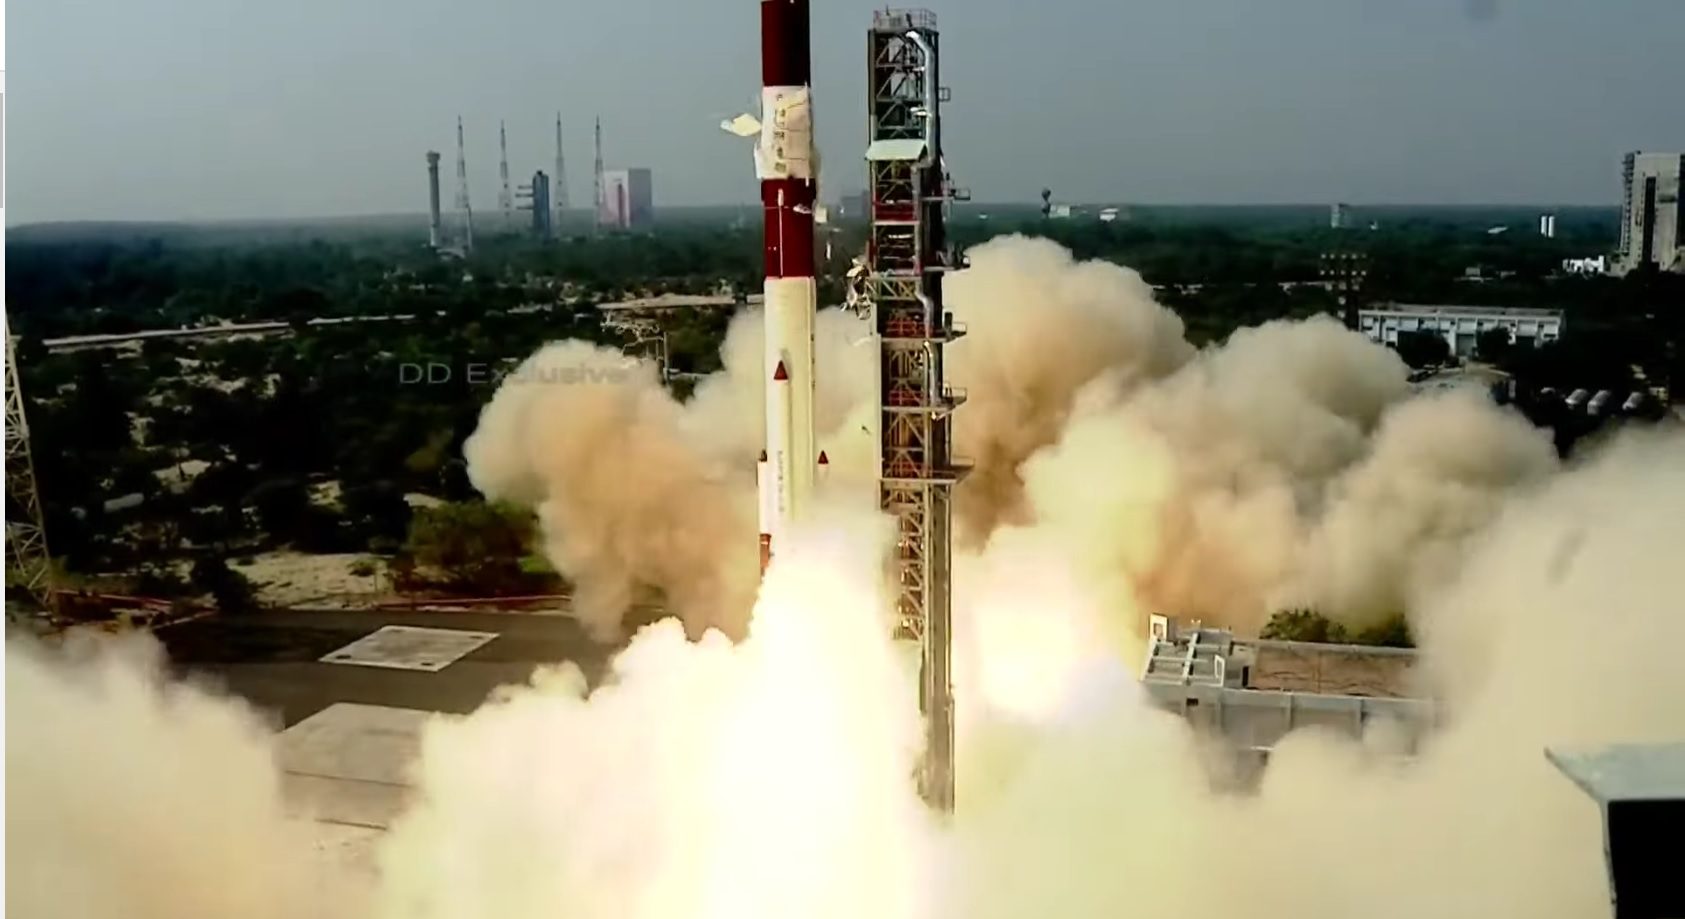 First launch of 2021 for India as PSLV places 19 payloads into LEO following a severely curtailed 2020